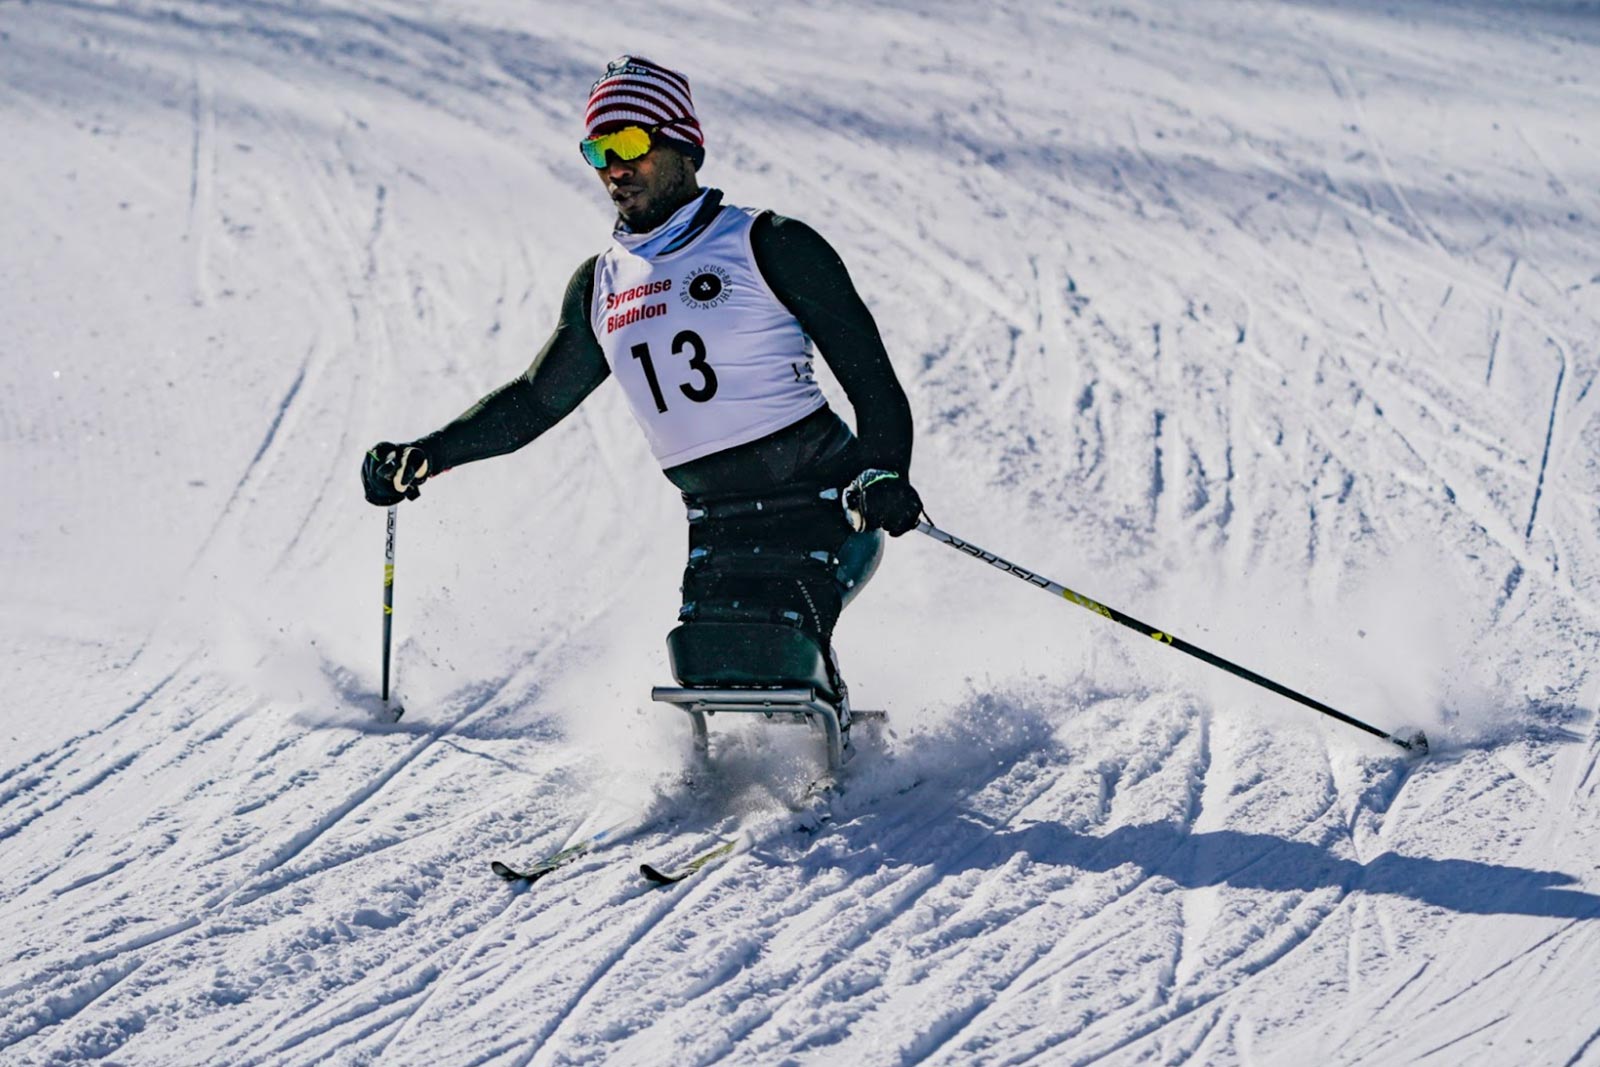 A skier racing down a slope.